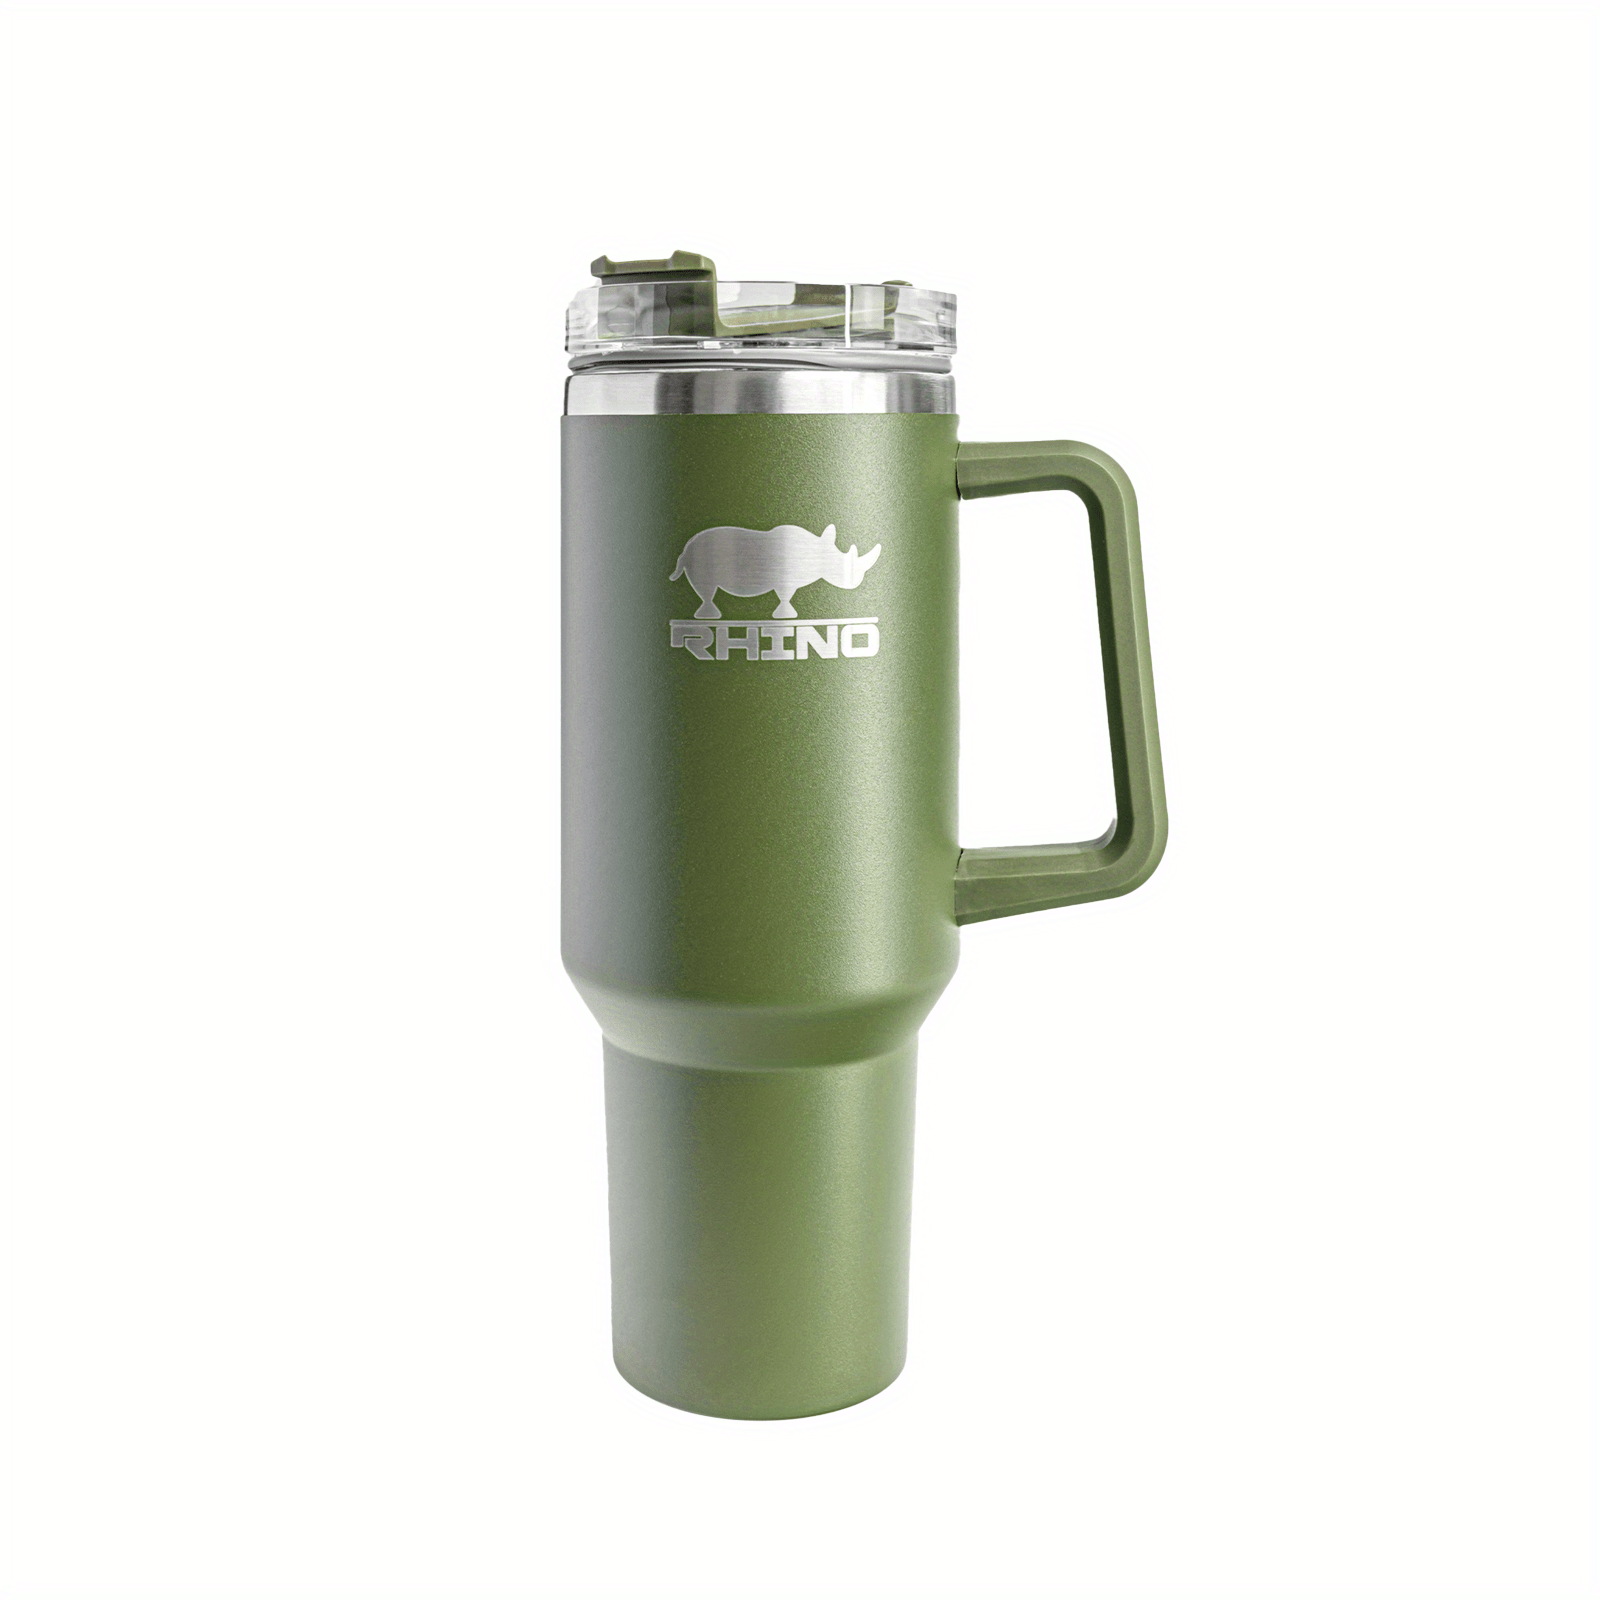 STANLEY GO series light drink accompanying cup 14OZ - Shop stanley